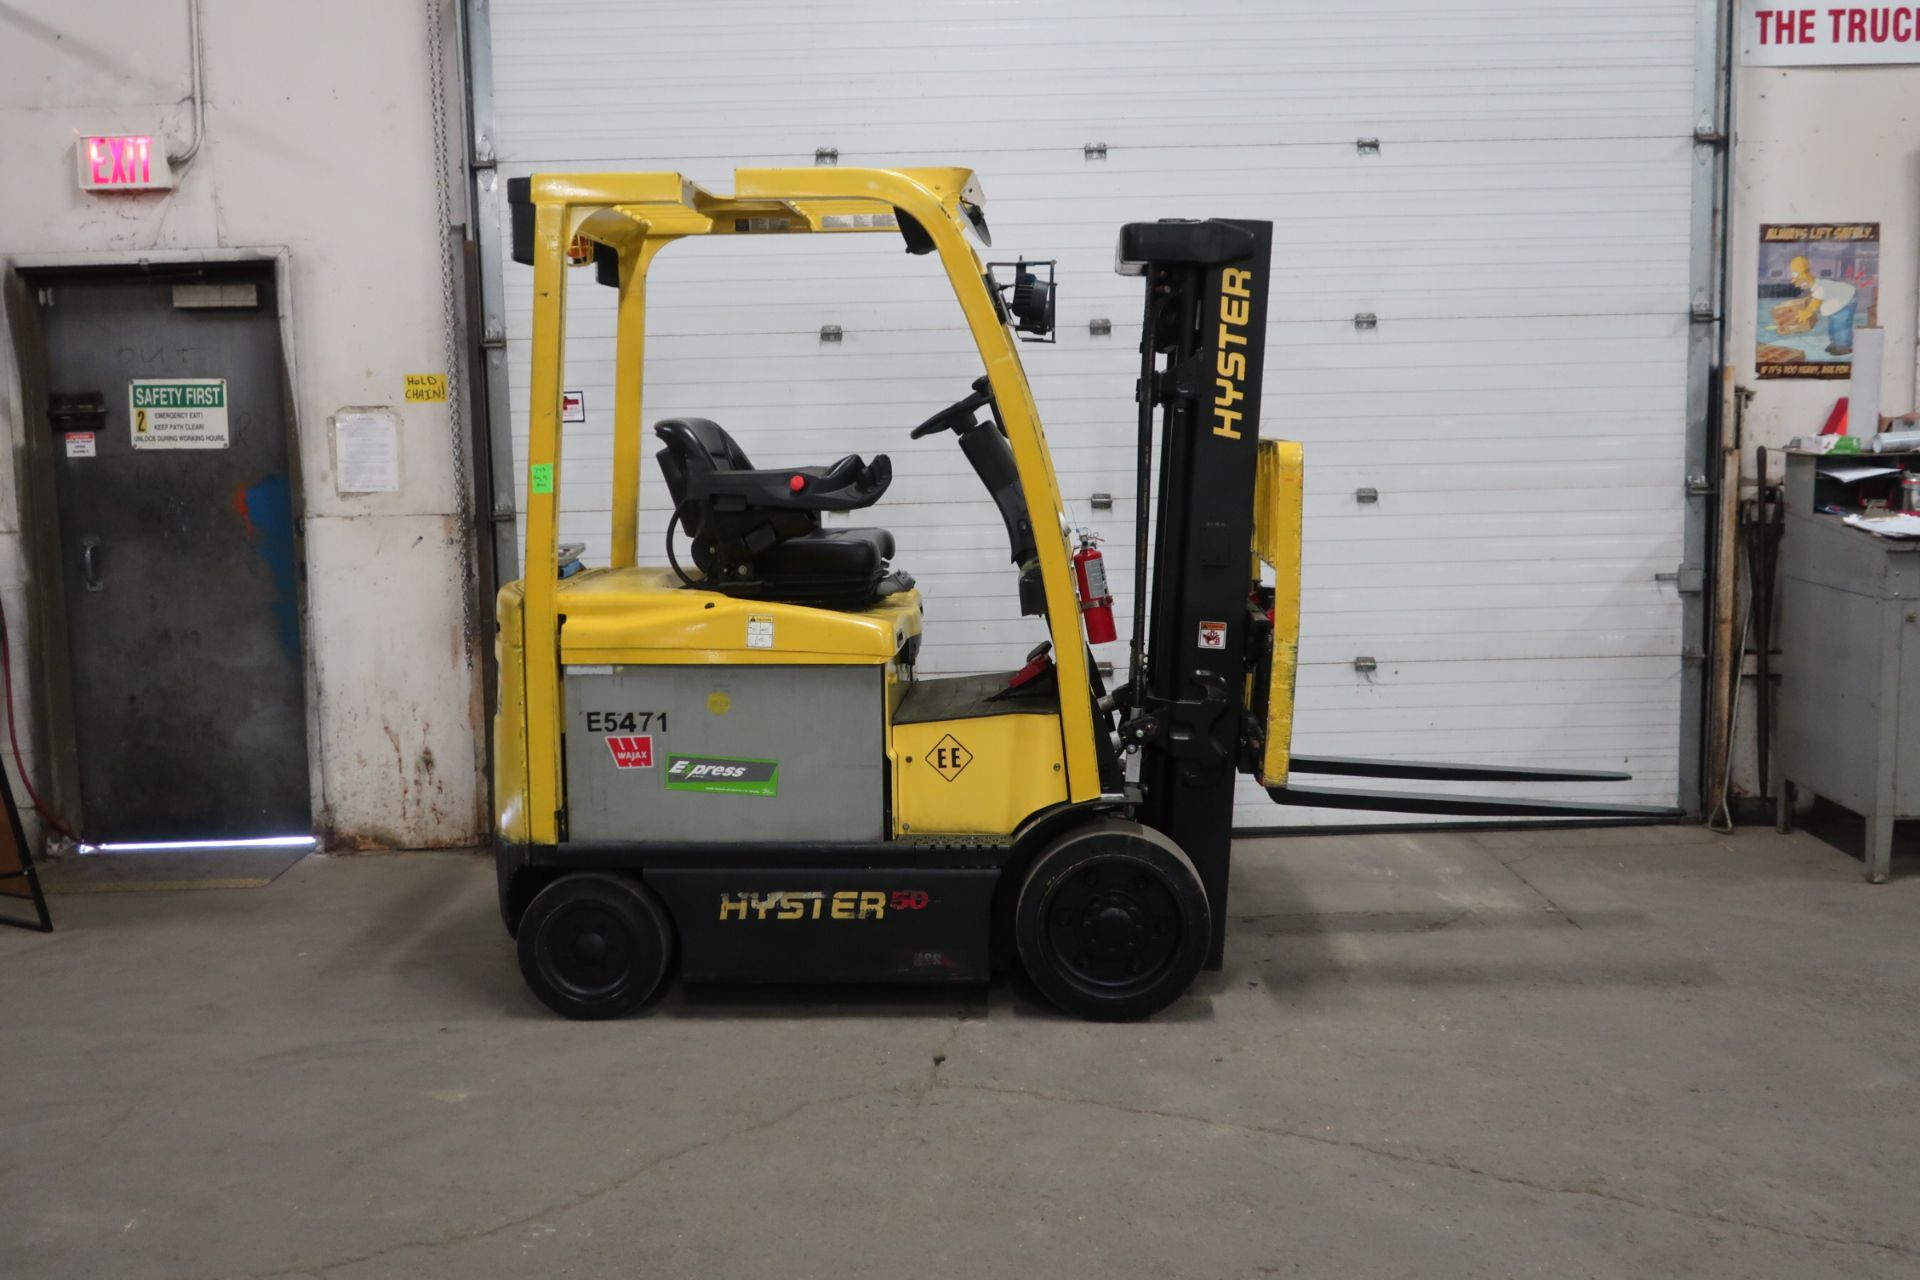 FREE CUSTOMS - 2014 Hyster 5000lbs forklift EXPLOSION PROOF "EE" rating with 3-stage, ELECTRIC &